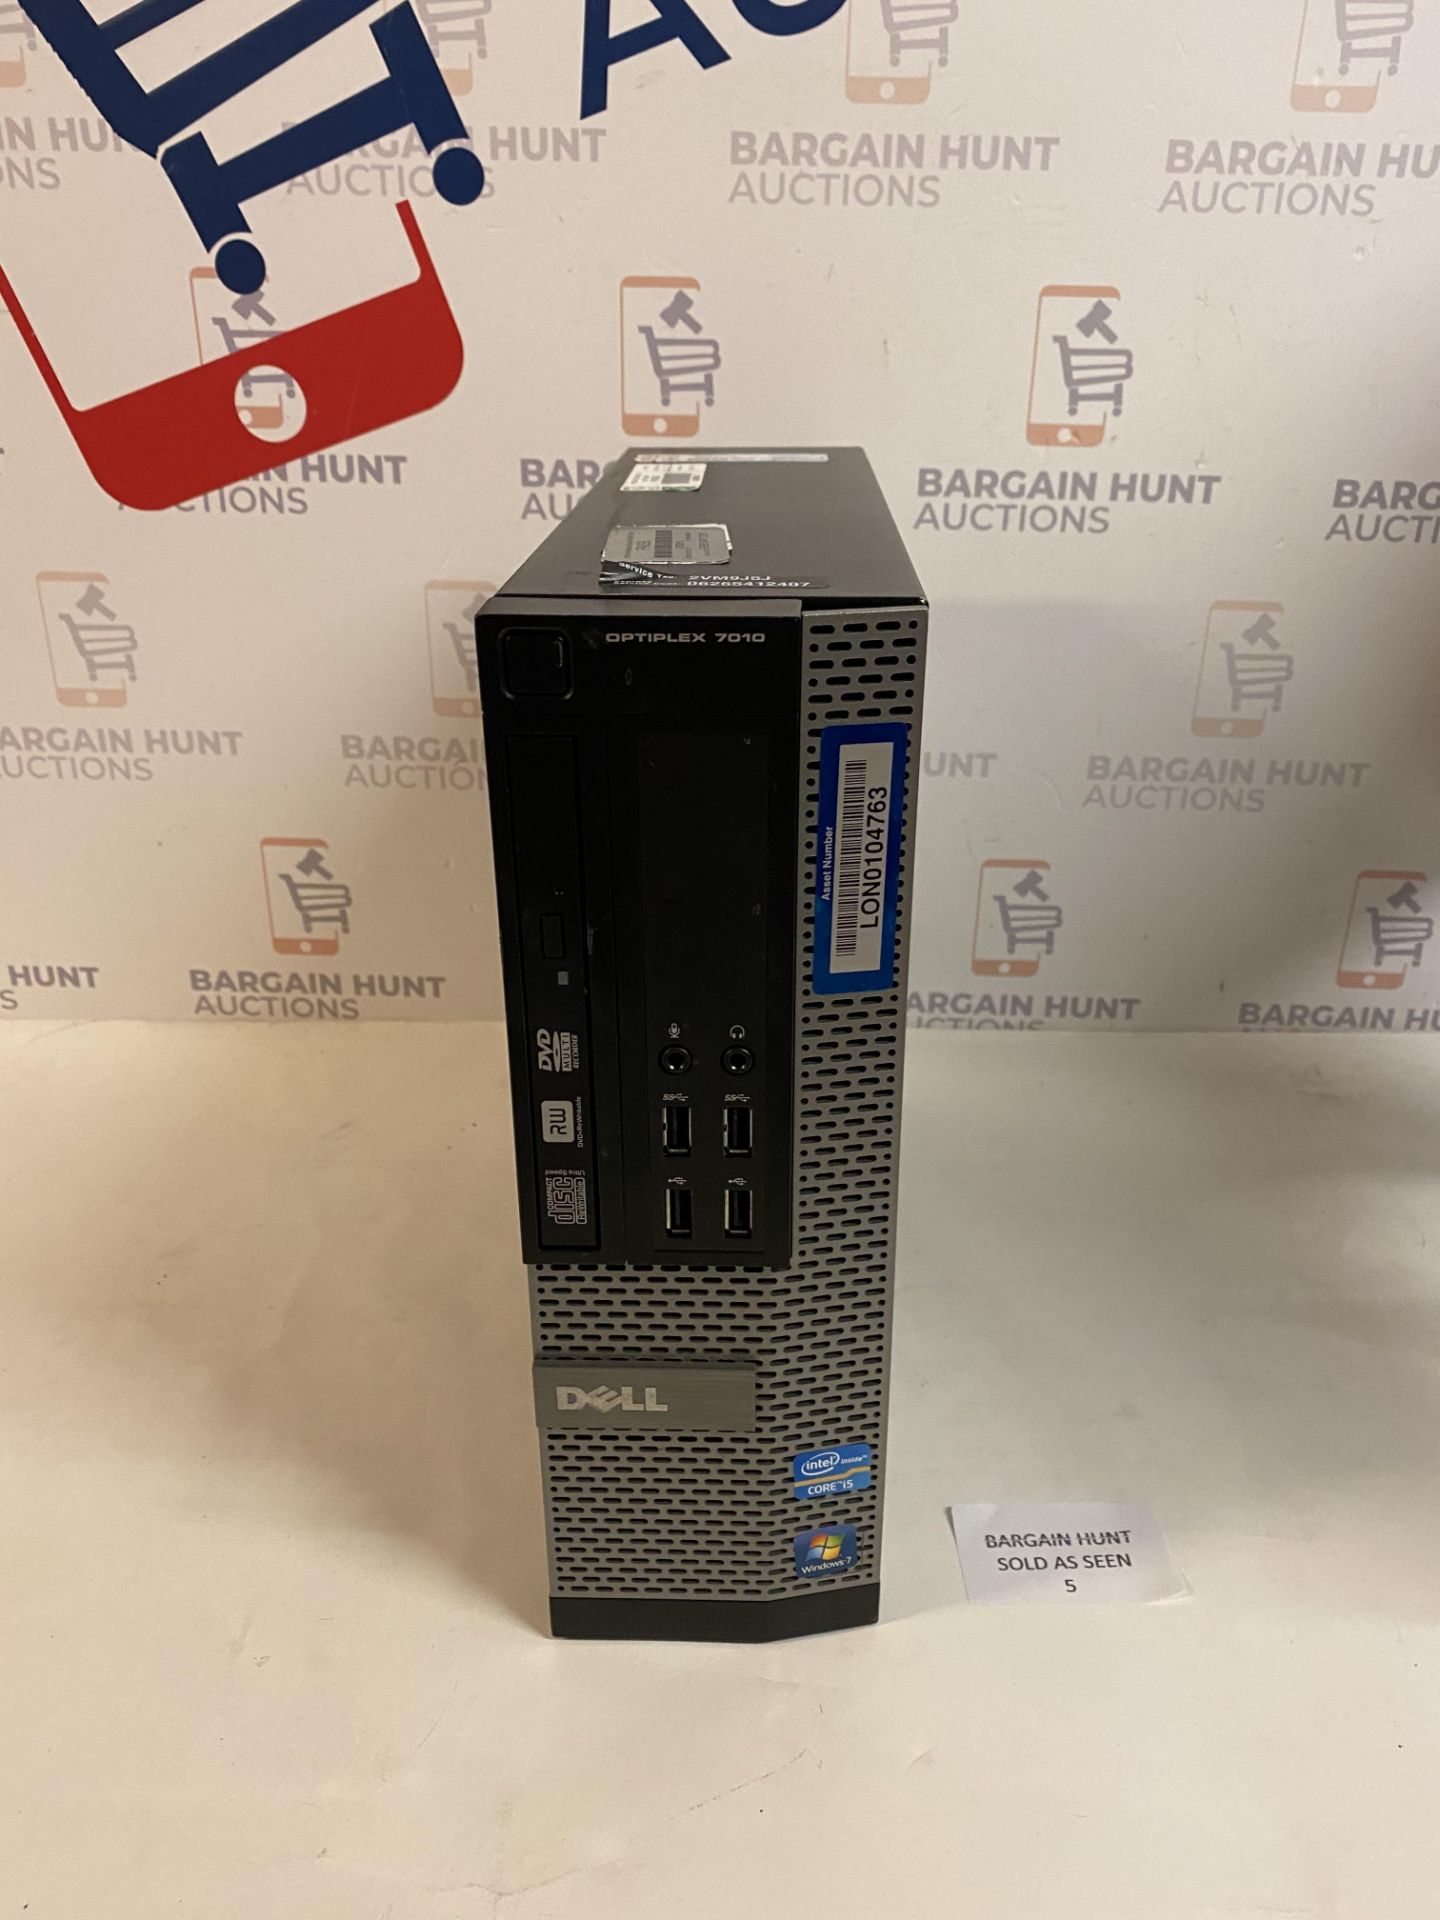 Dell Optiplex 7010 i5 Desktop PC (monitor used for testing purposes only, see images)